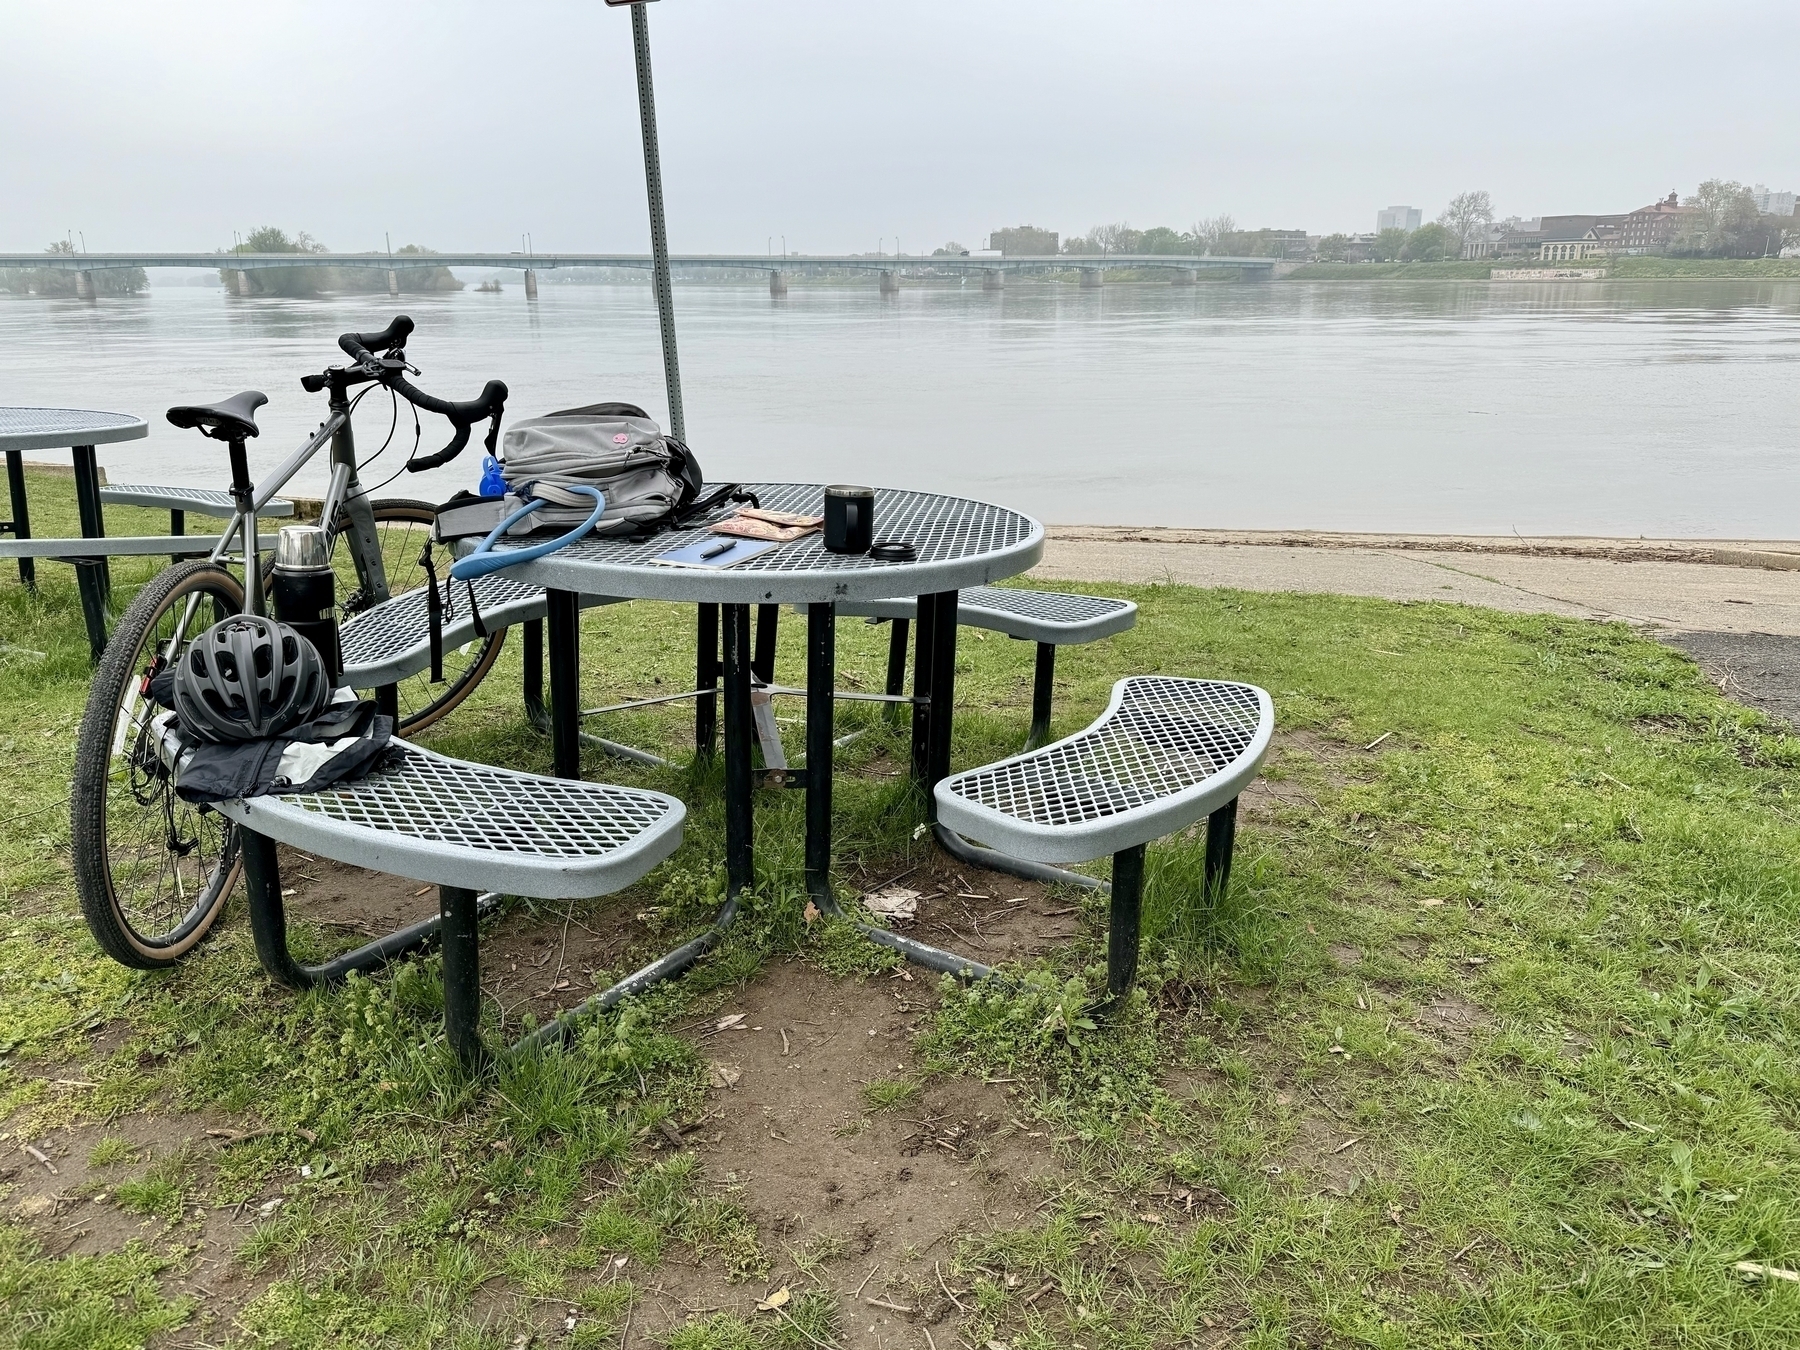 Bike leaning up against a picnic table. River in view, and a city on the other side of the river.